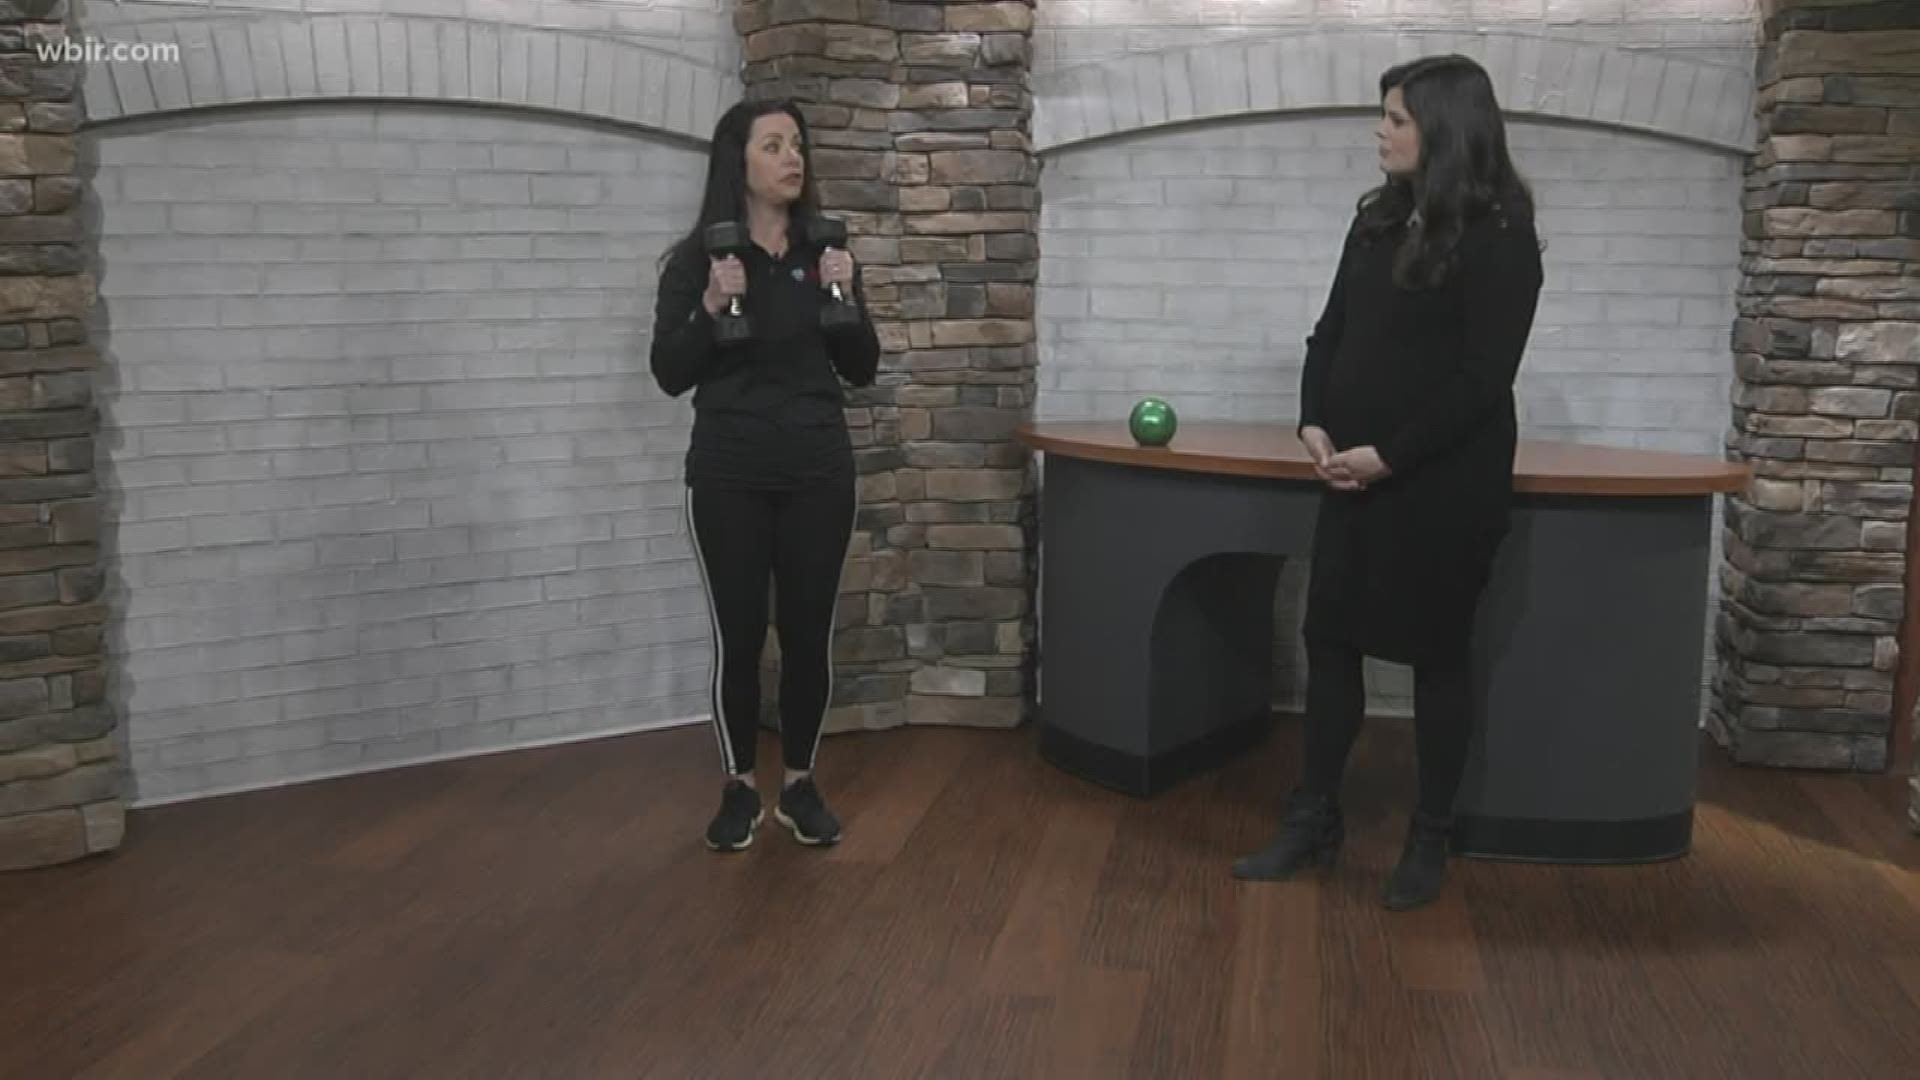 April from Workout Anytime shares some exercises to help you stick to your New Year's Resolutions.